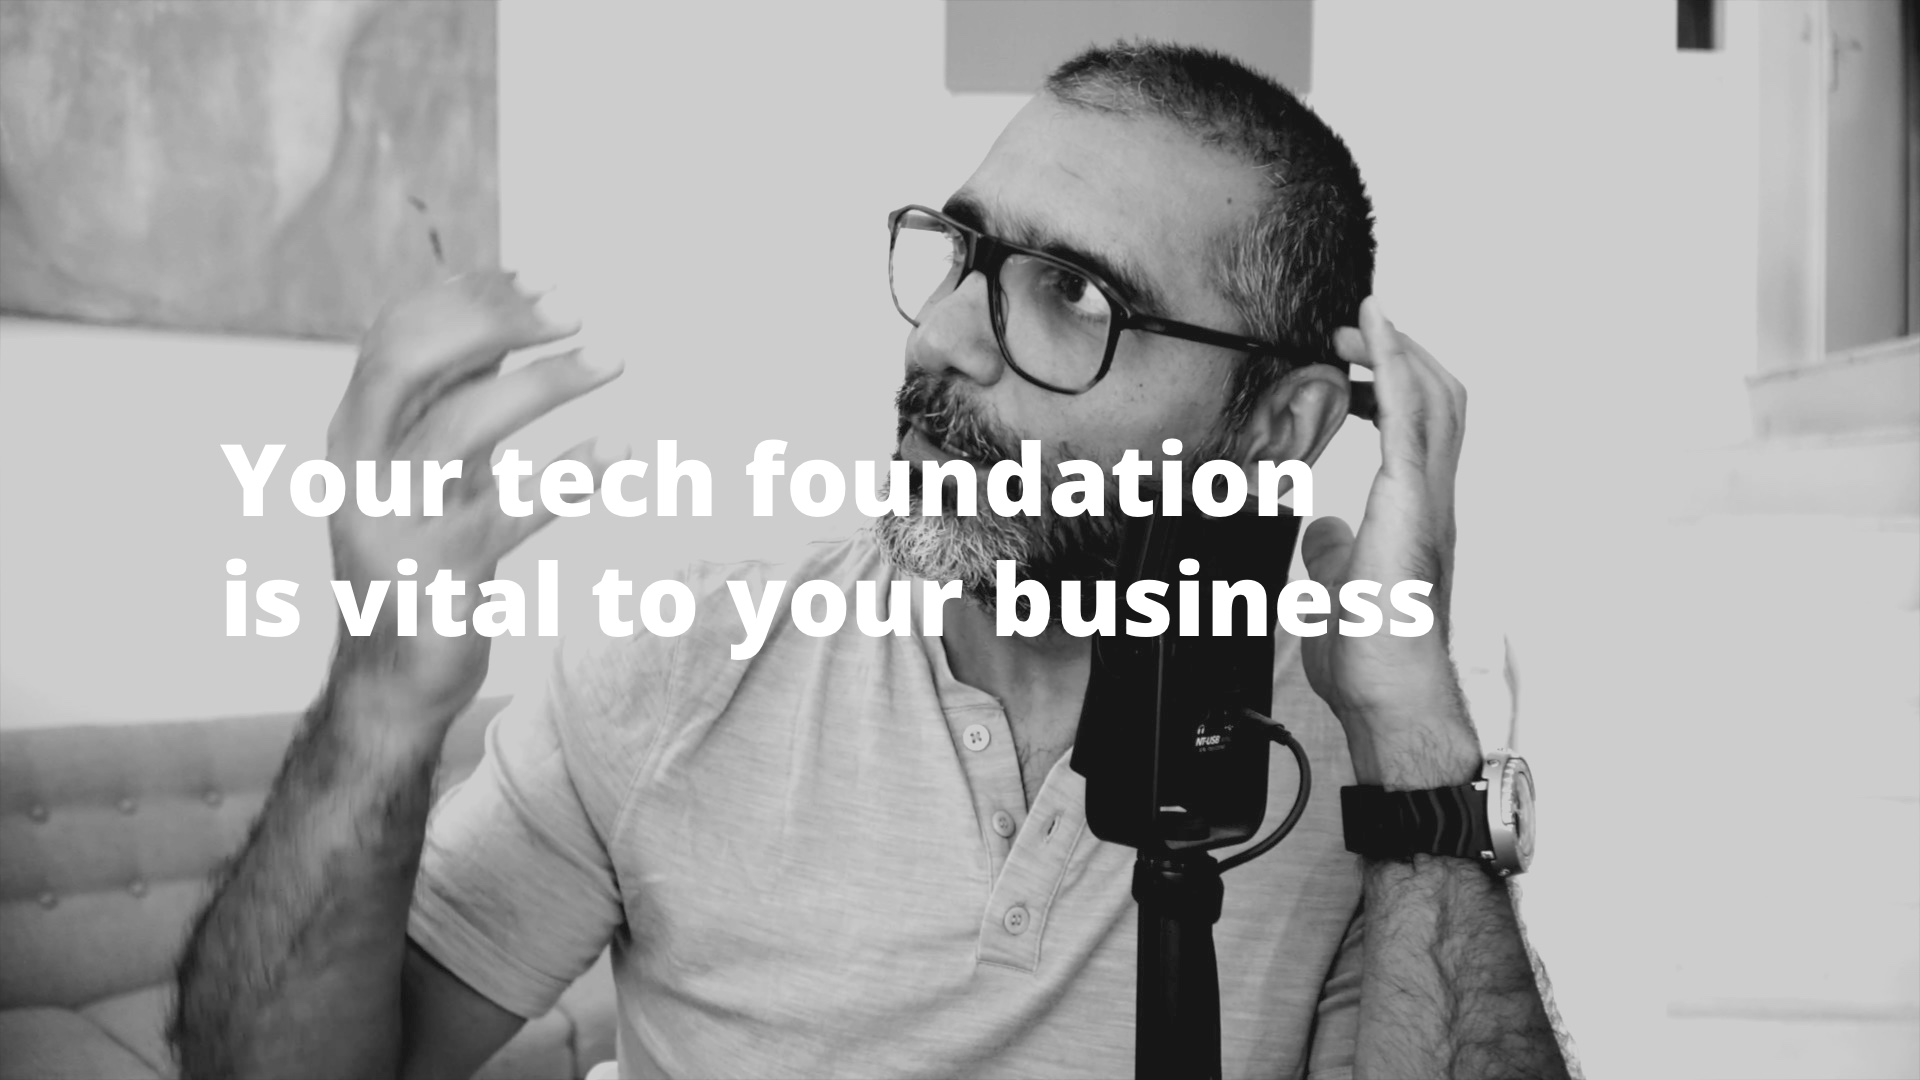 Your tech foundation is vital to your business